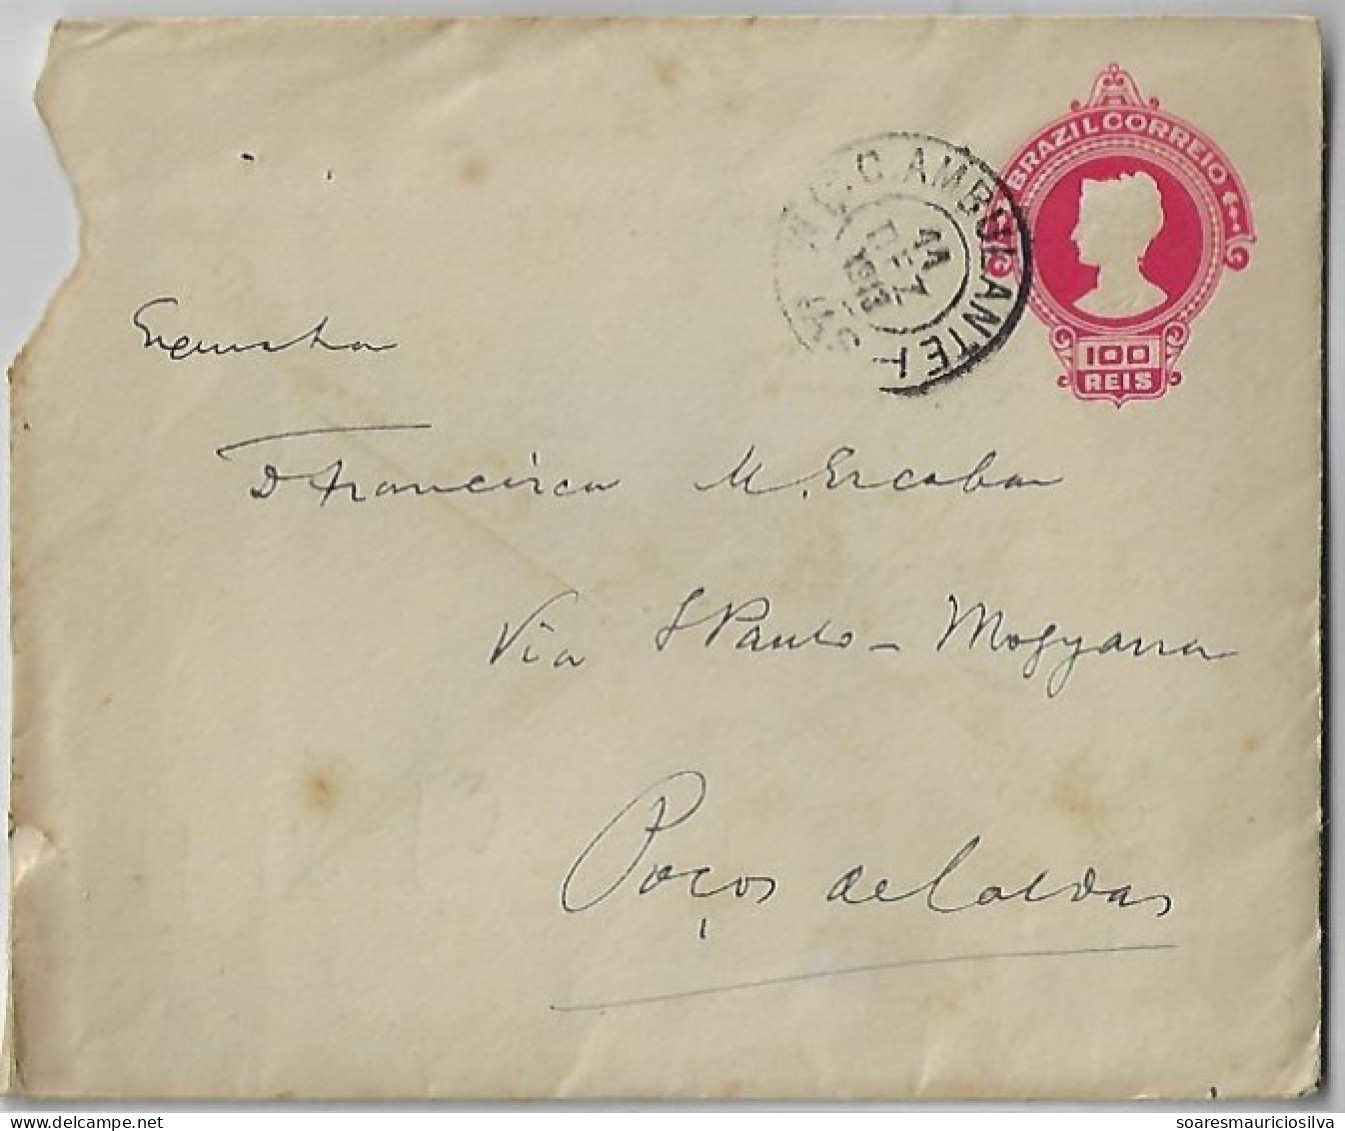 Brazil 1913 Postal Stationery Cover Sent By Traveling Courier To Mogiana Railway Co Station In Poços De Caldas Watermark - Covers & Documents